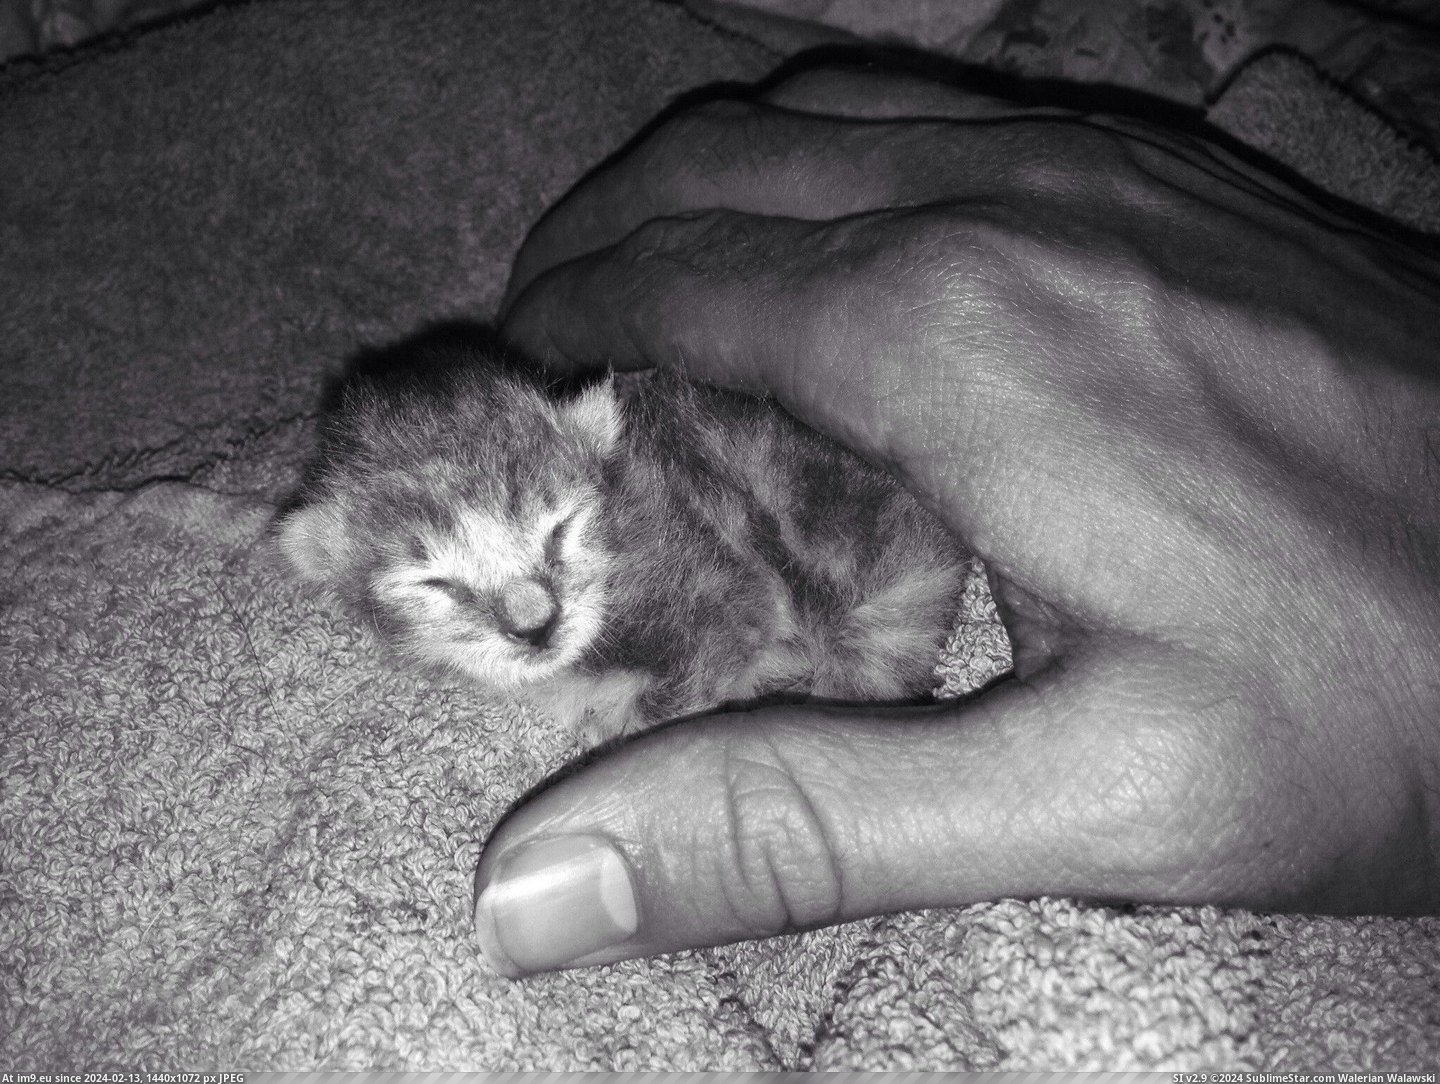 #Cat #Old #Thumb #Size #Unexpected #Kitten #Single [Aww] Our 13 your old cat had a single unexpected kitten today. He's about the size of my thumb Pic. (Image of album My r/AWW favs))